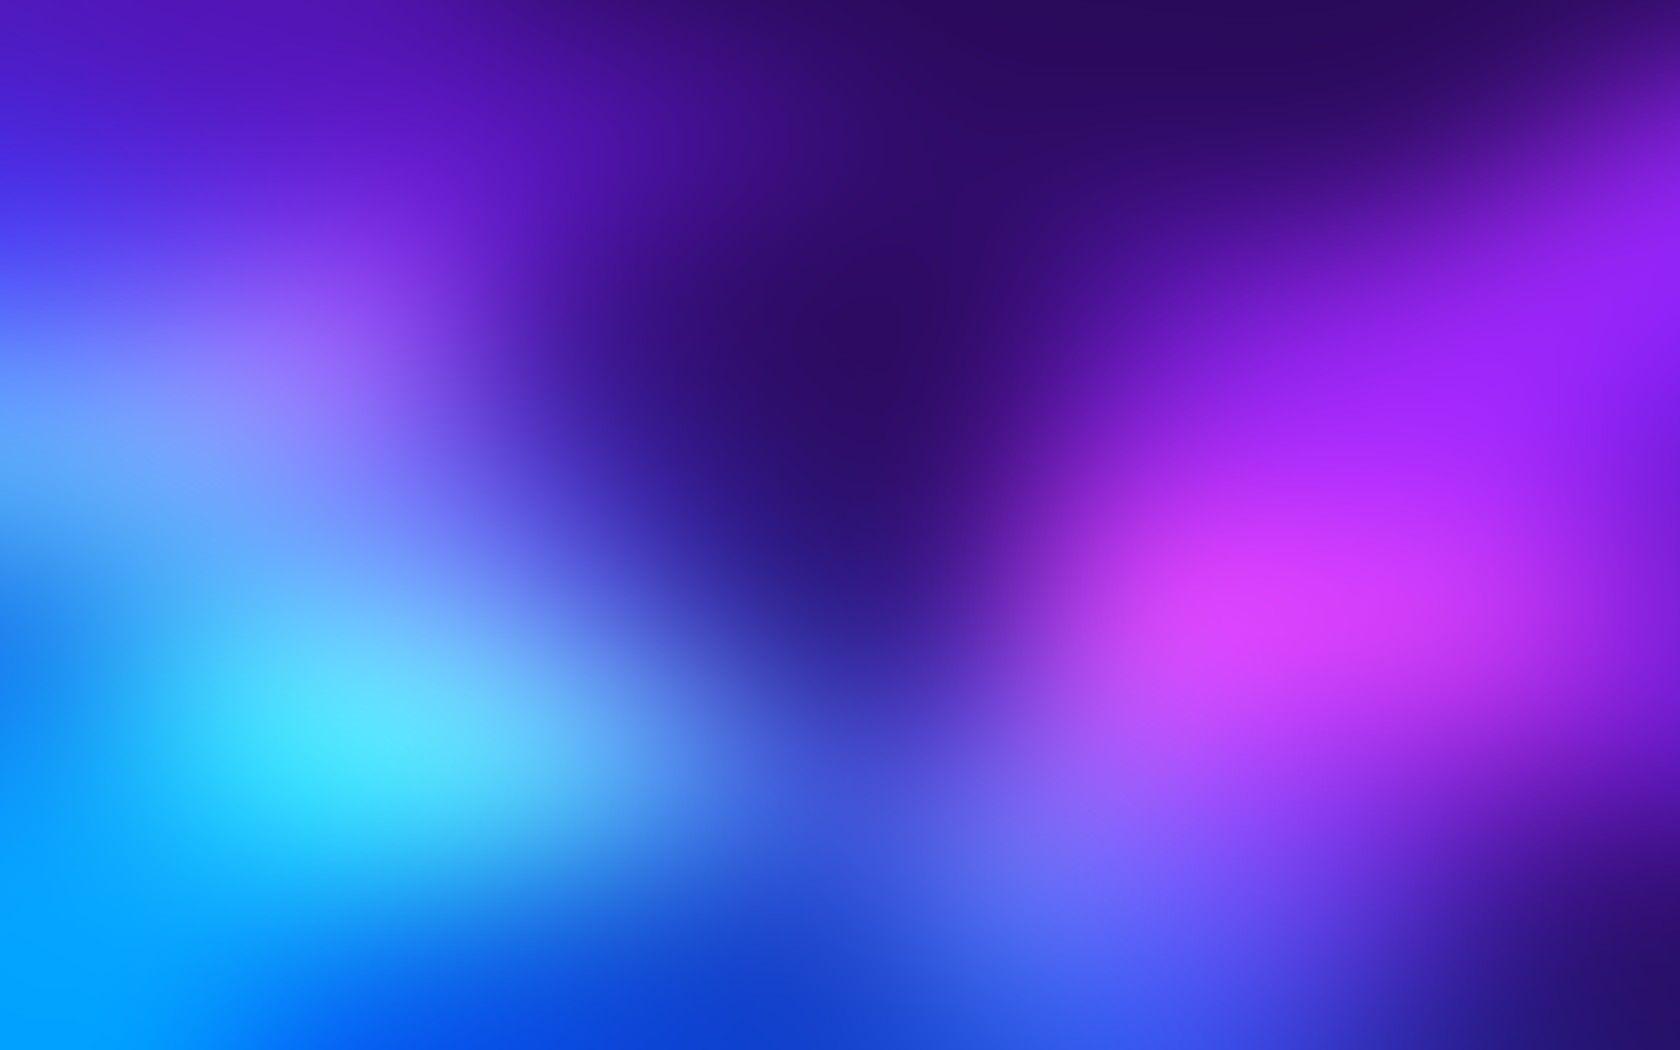 Minimalistic candy blurred colors smooth wallpaper. AllWallpaper